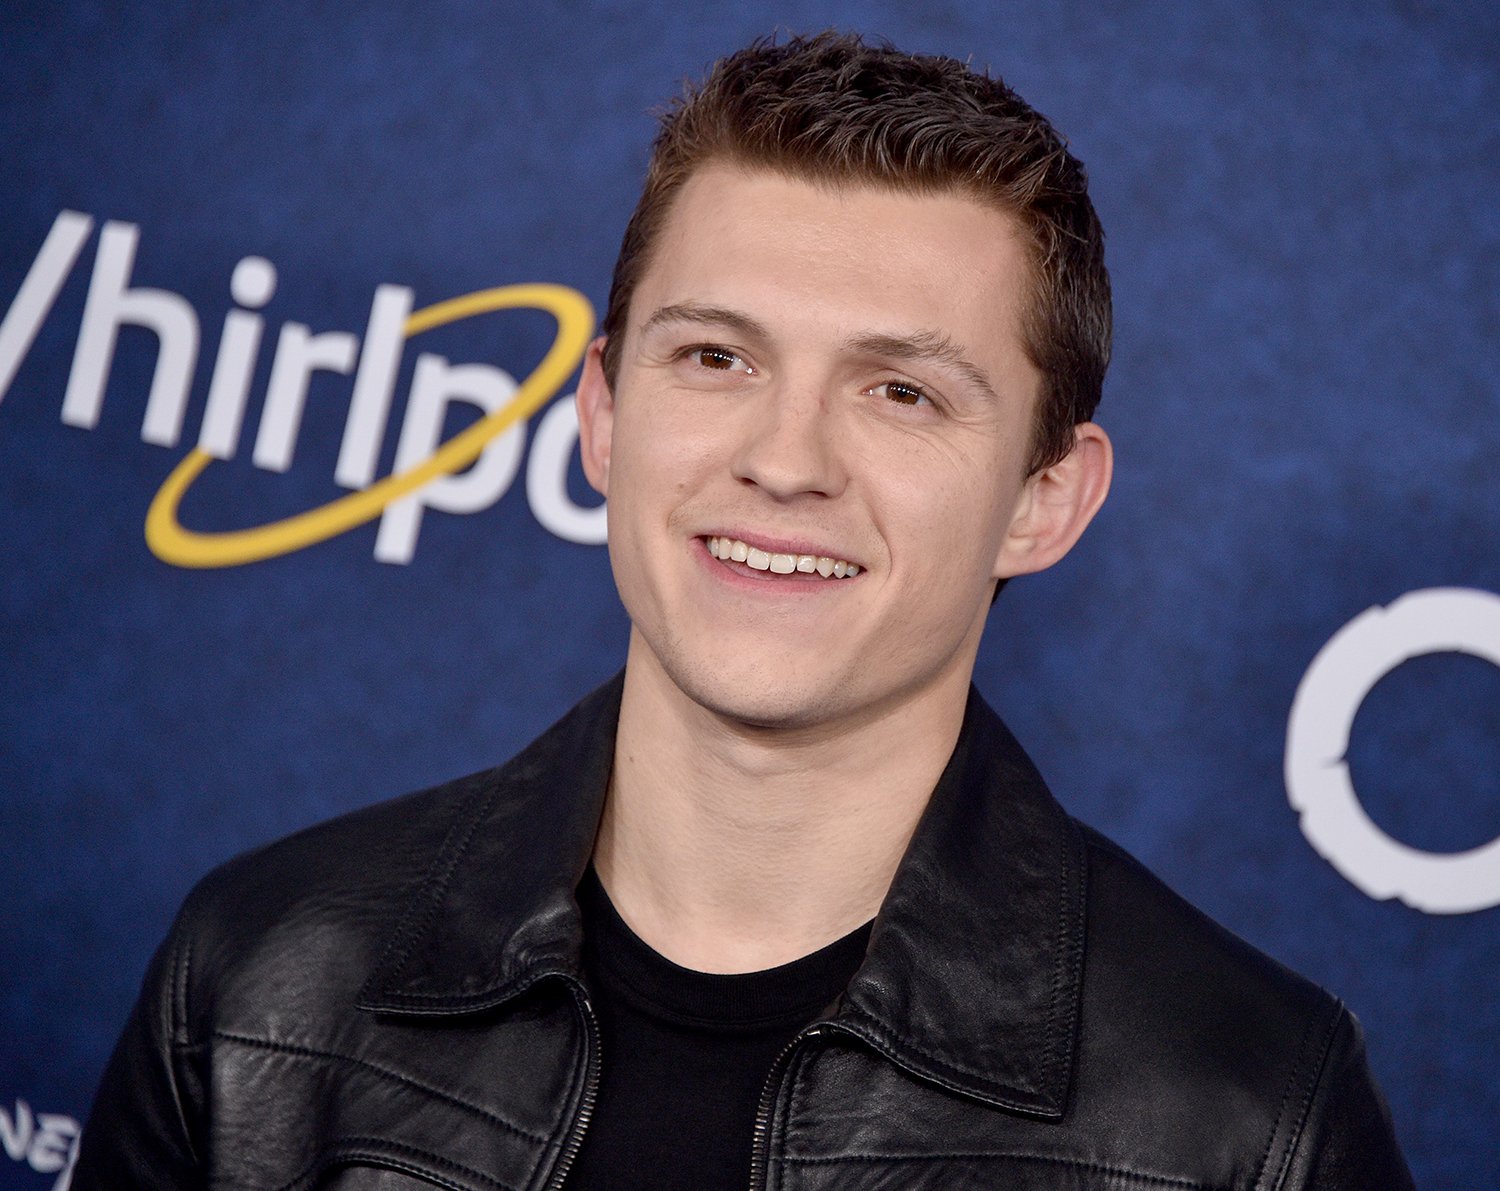 Uncharted star Tom Holland attends the Premiere Of Disney And Pixar's Onward